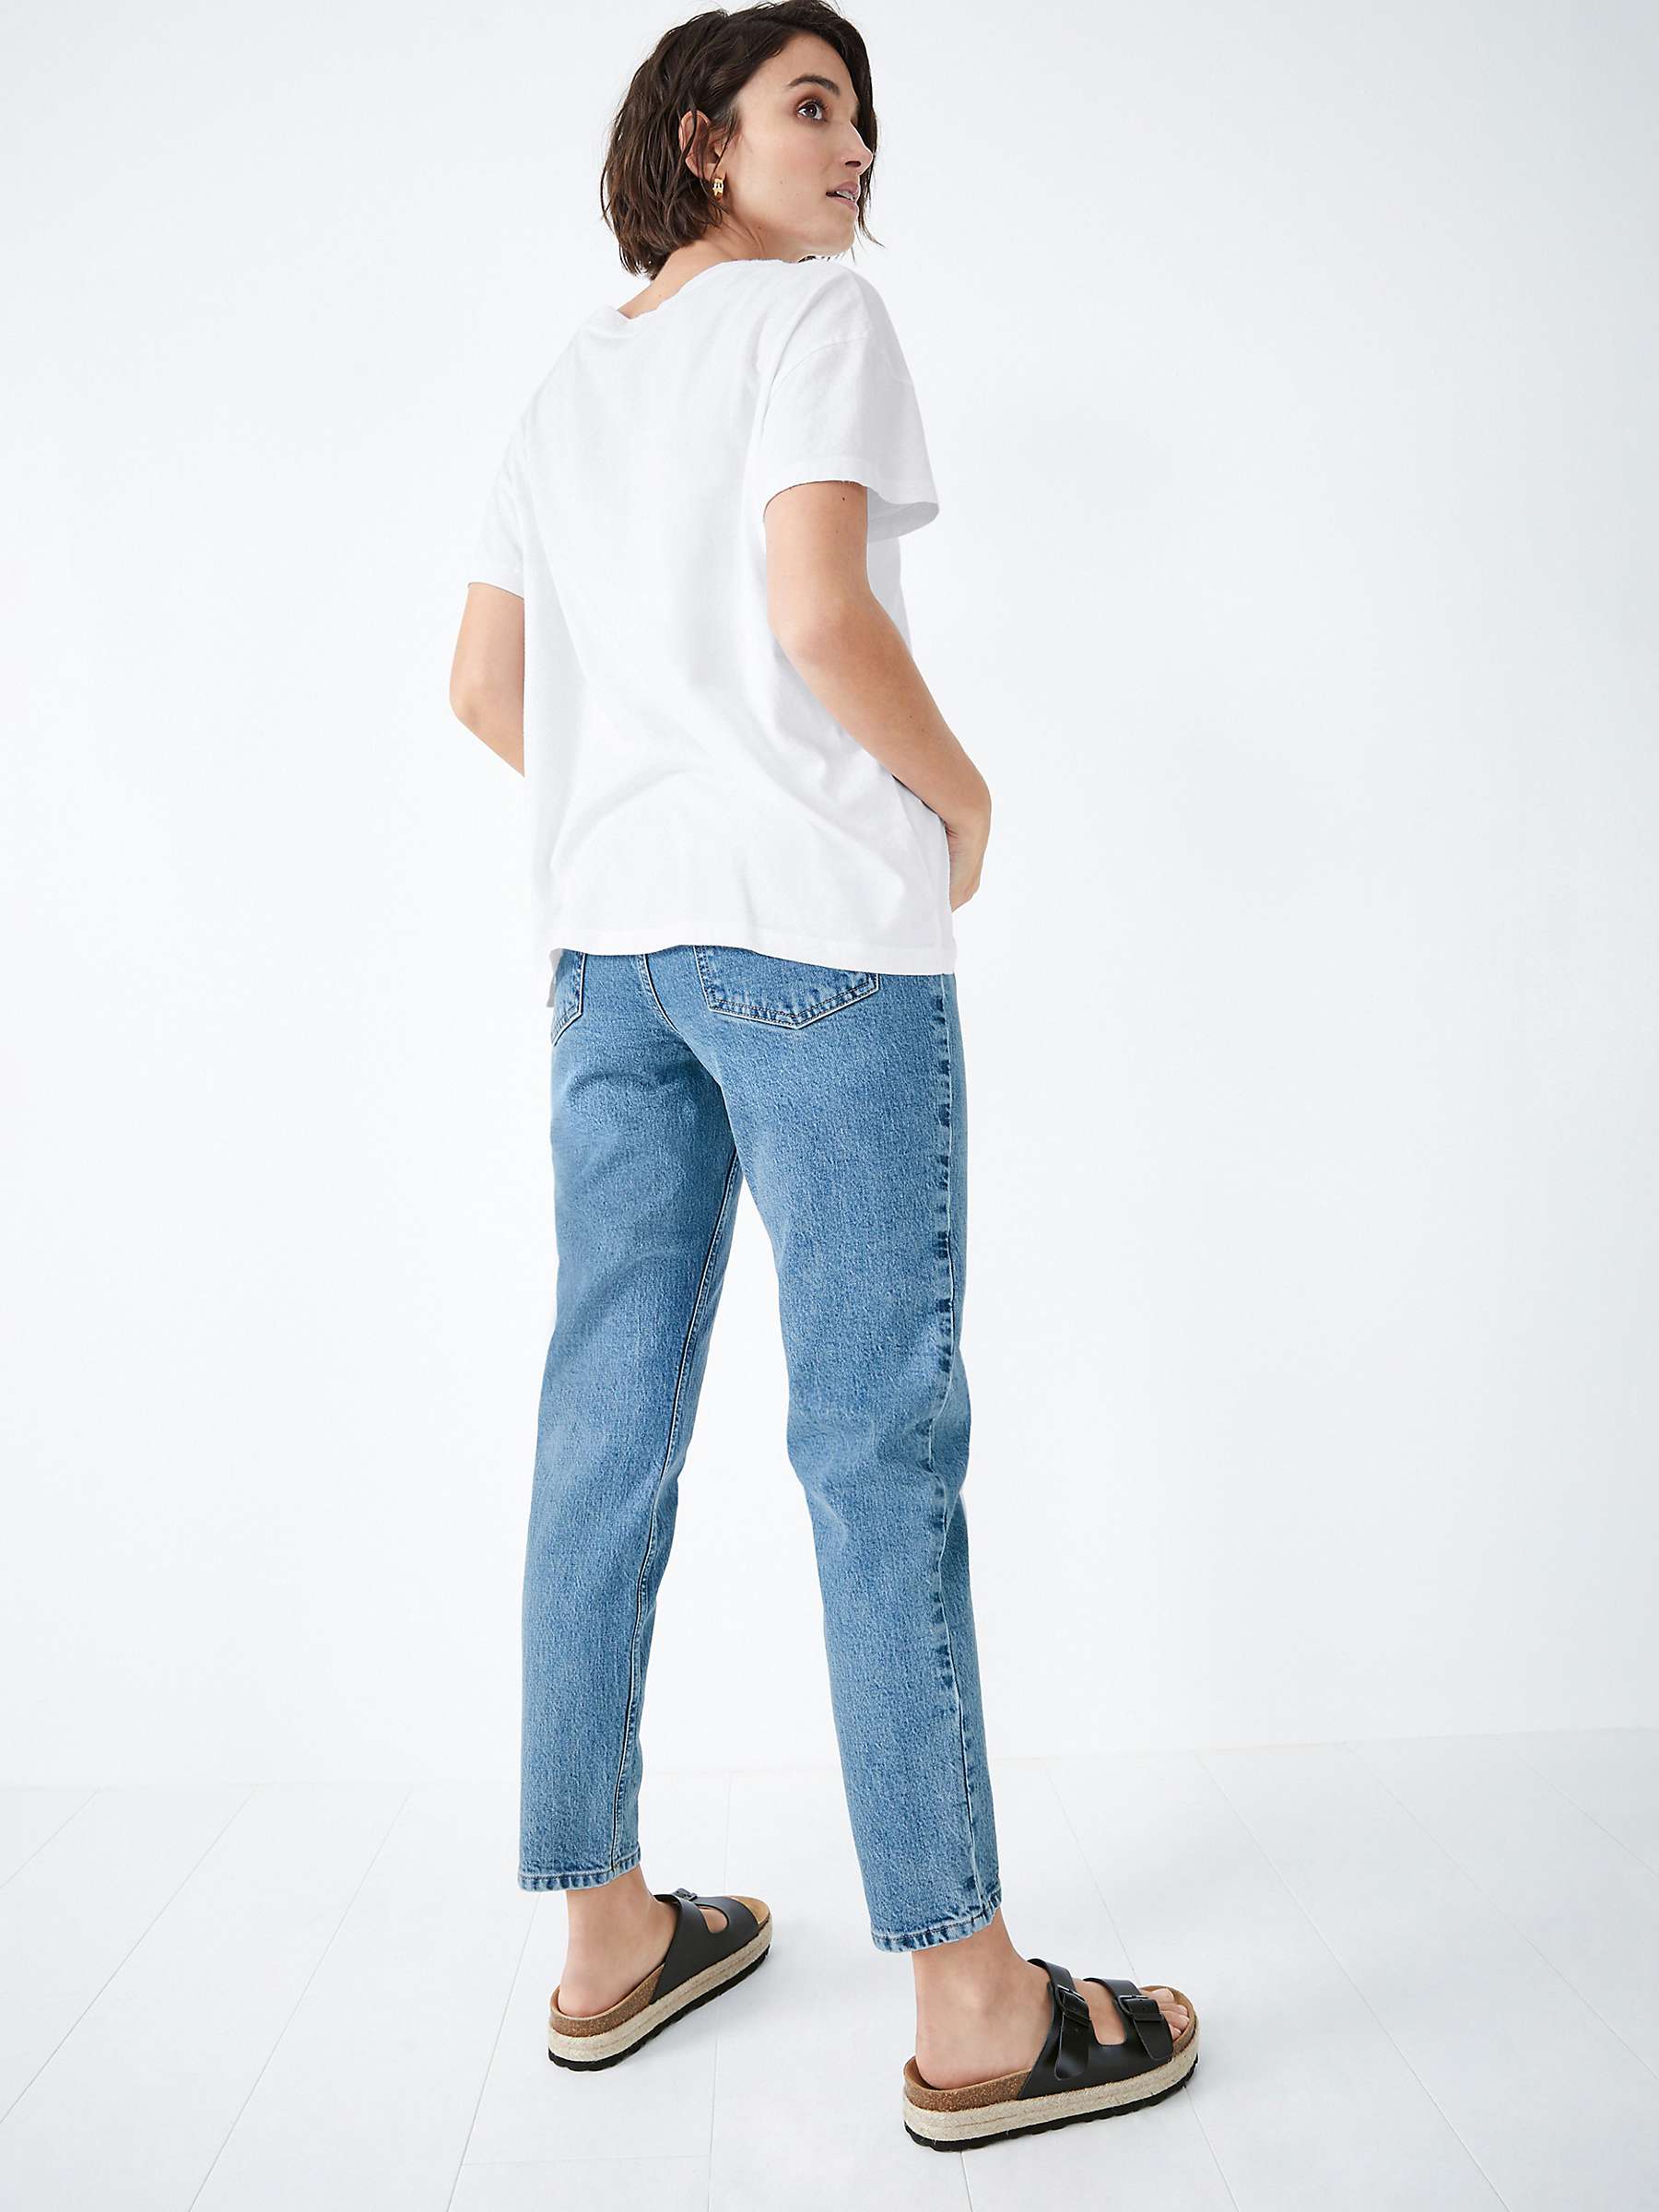 HUSH Frieda Mom Jeans, Mid Blue Authentic at John Lewis & Partners